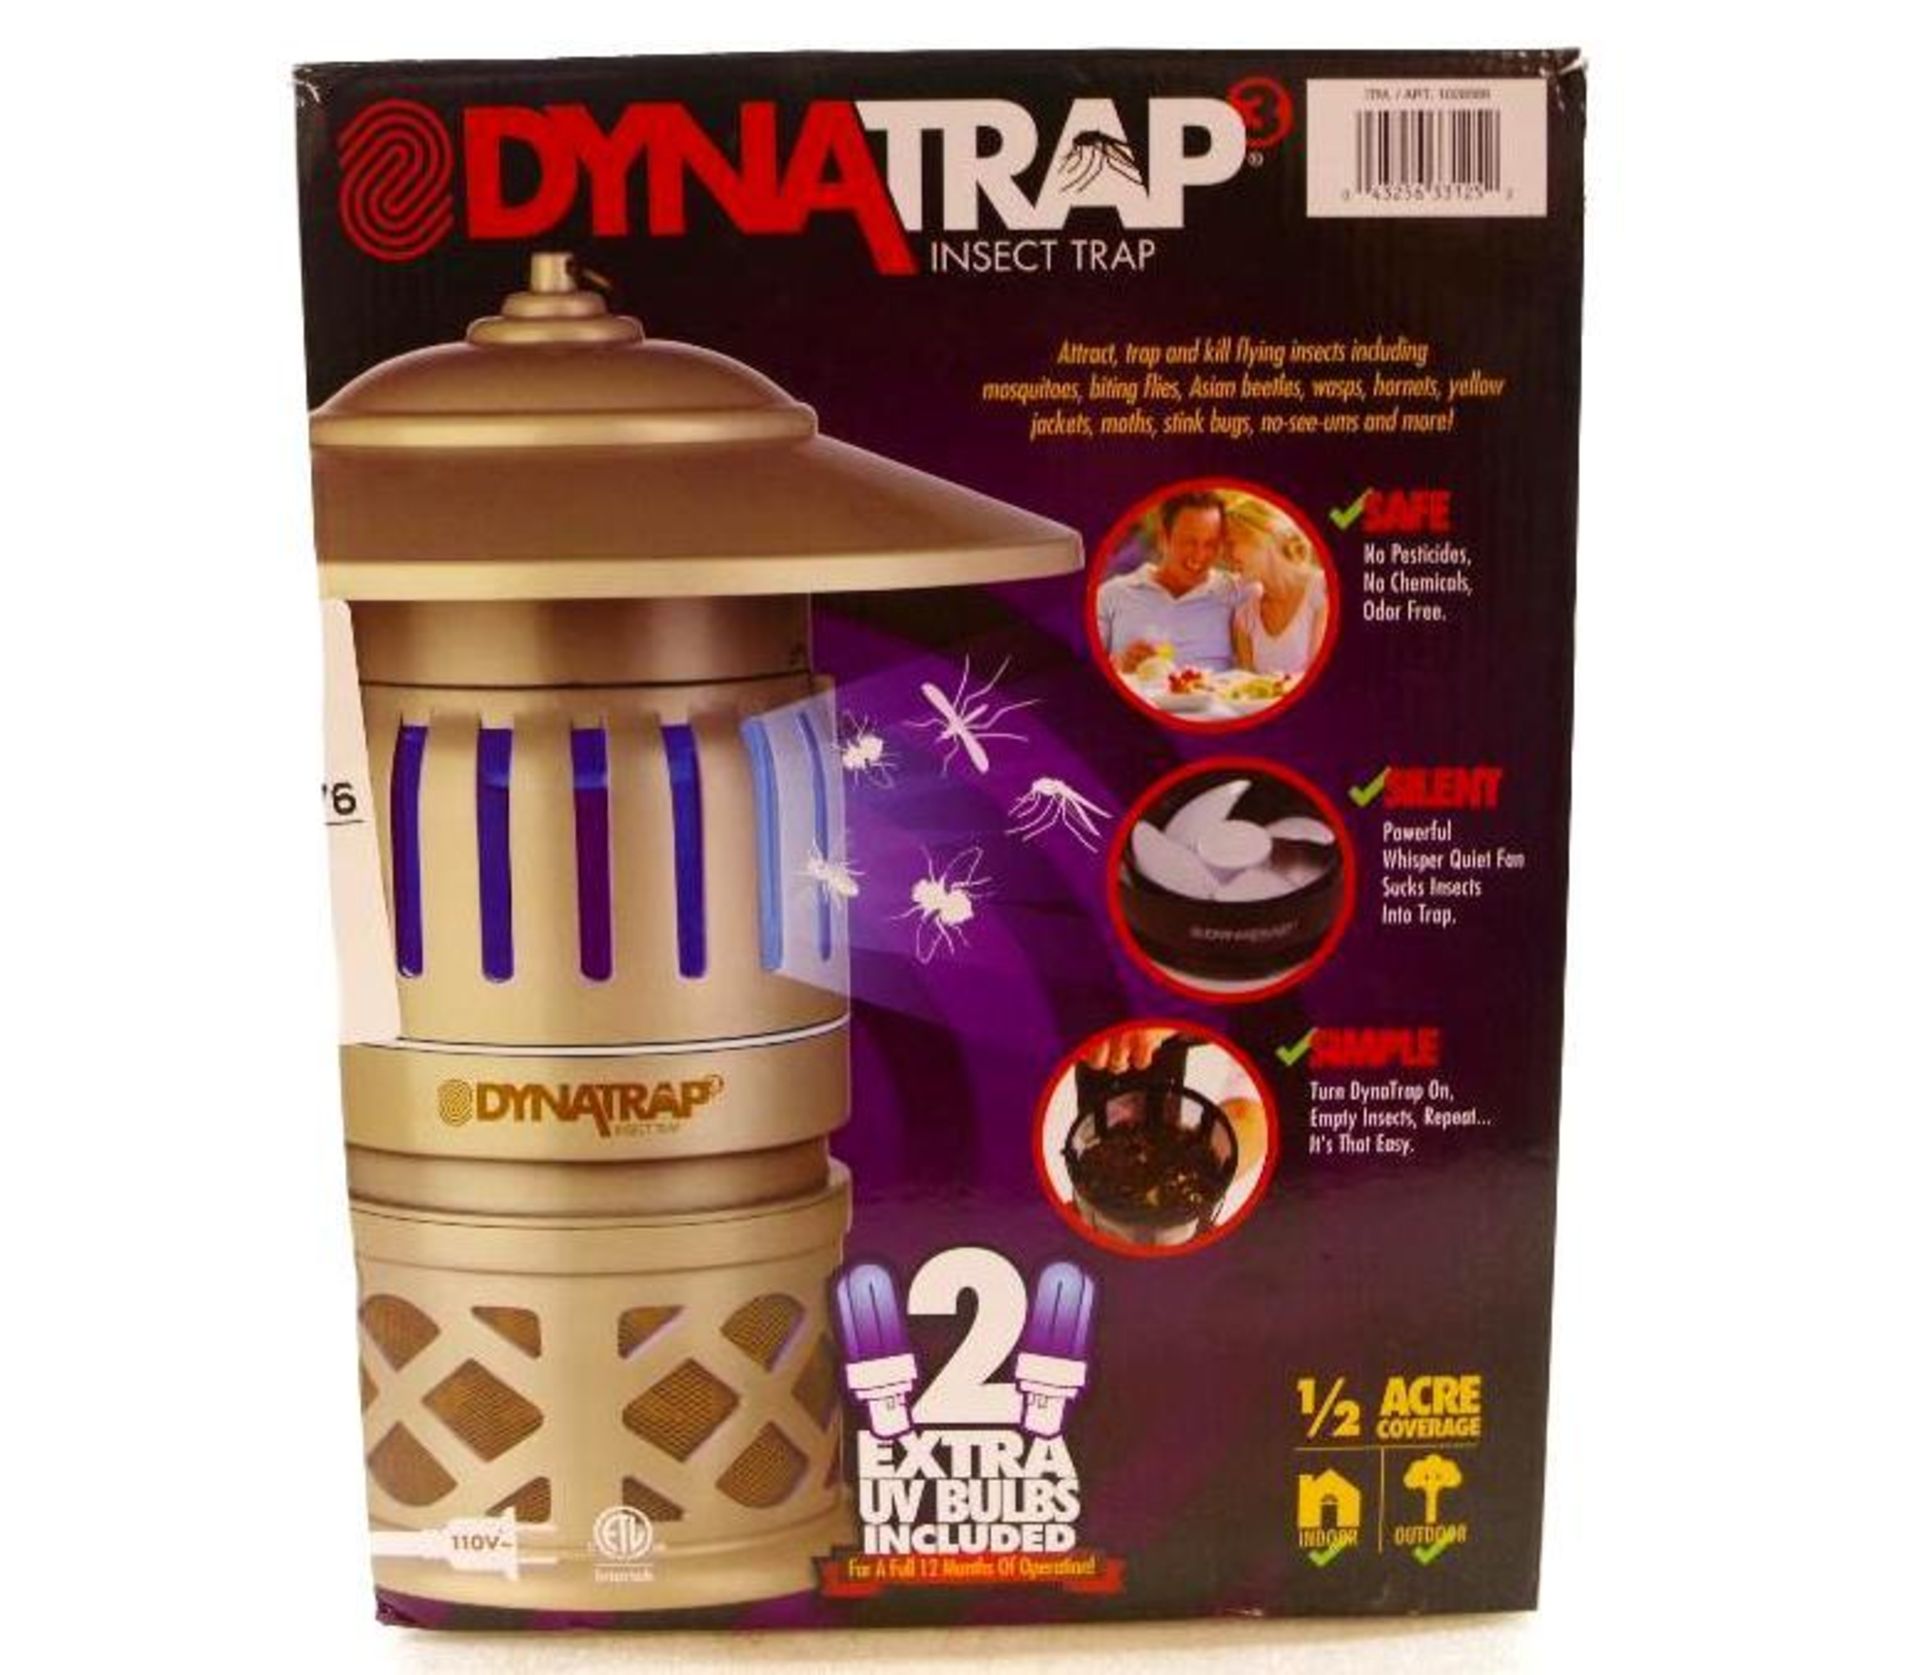 DYNA TRAP Insect Trap (Store return, Condition unknown)